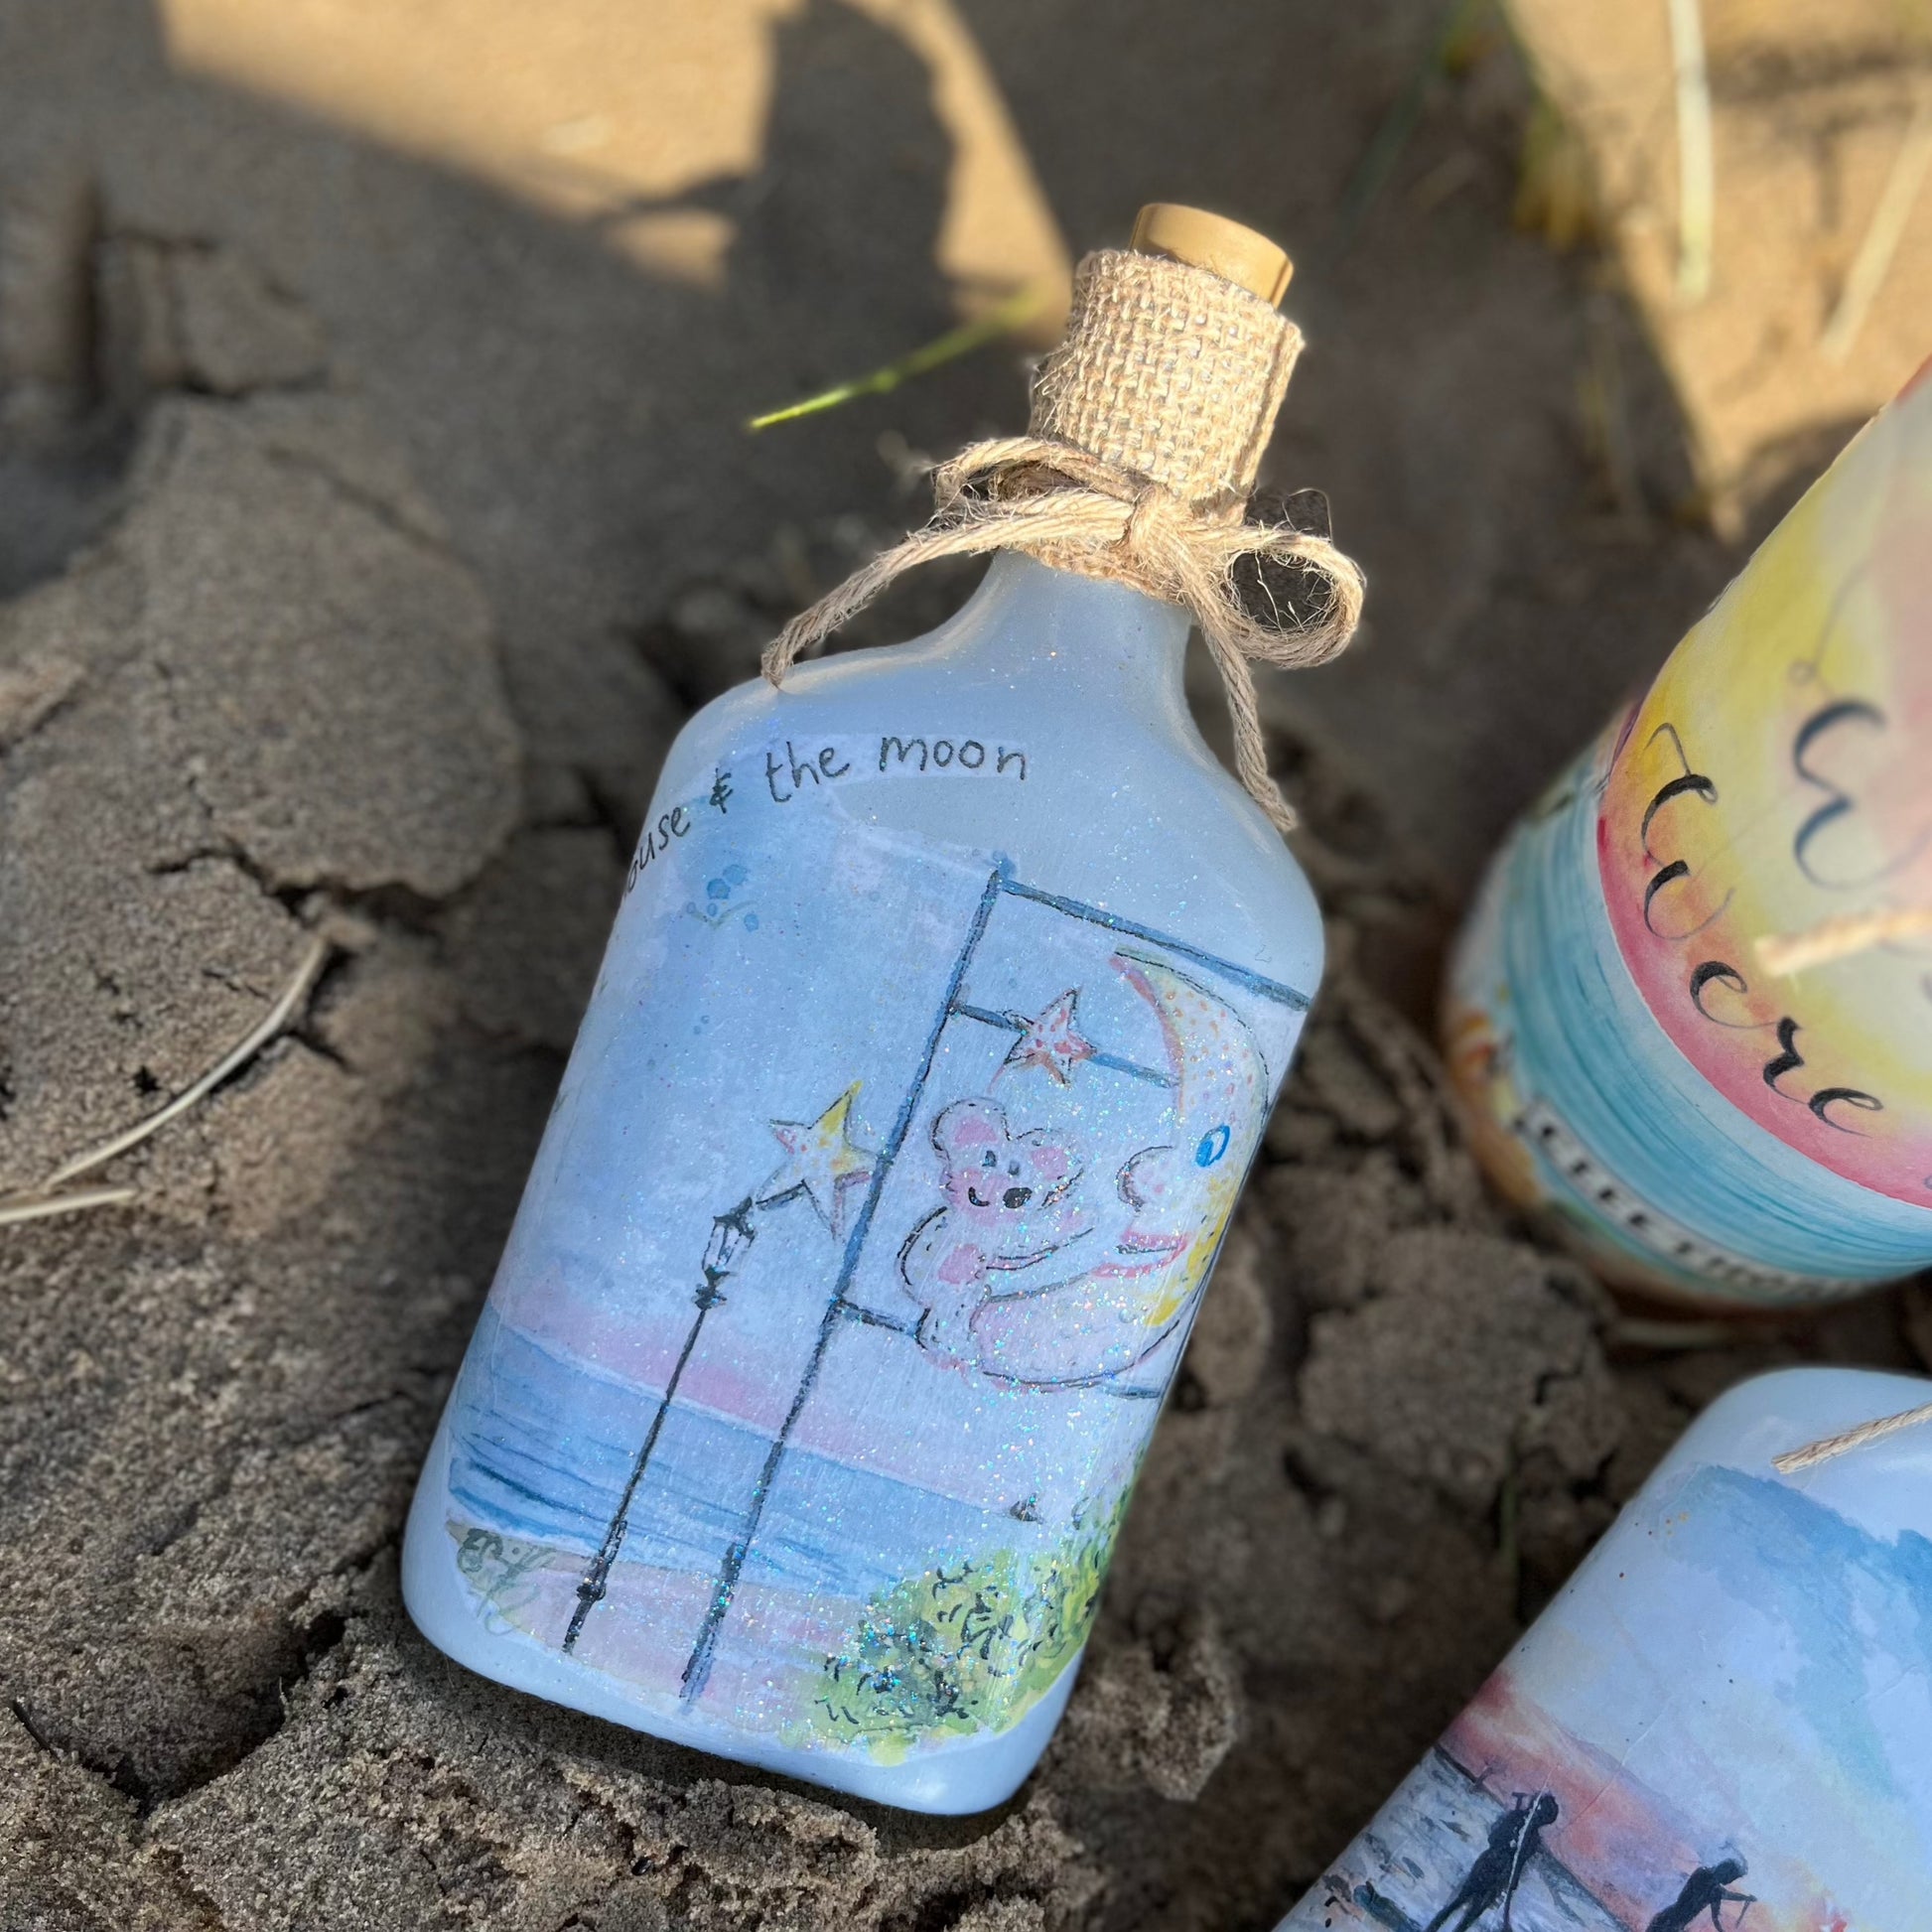 A decoupaged jar on Cleethorpes beach, featuring watercolour artwork of the Mouse and the Moon by Eve Leoni Smith and Jollypotz.